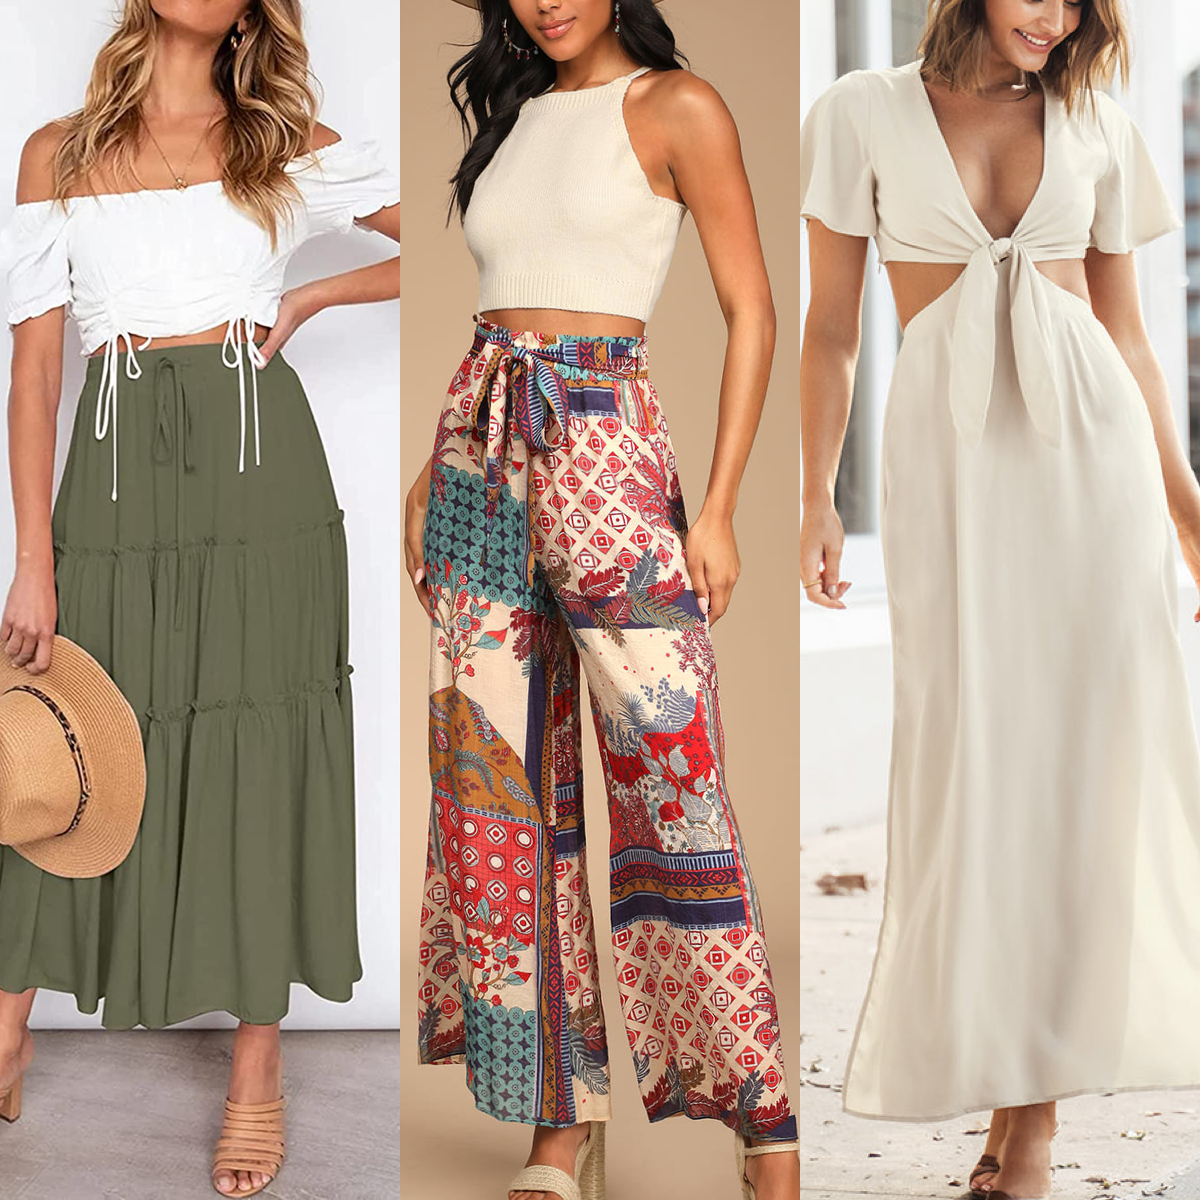 Affordable Free People Dupes on  - Lauren Erro